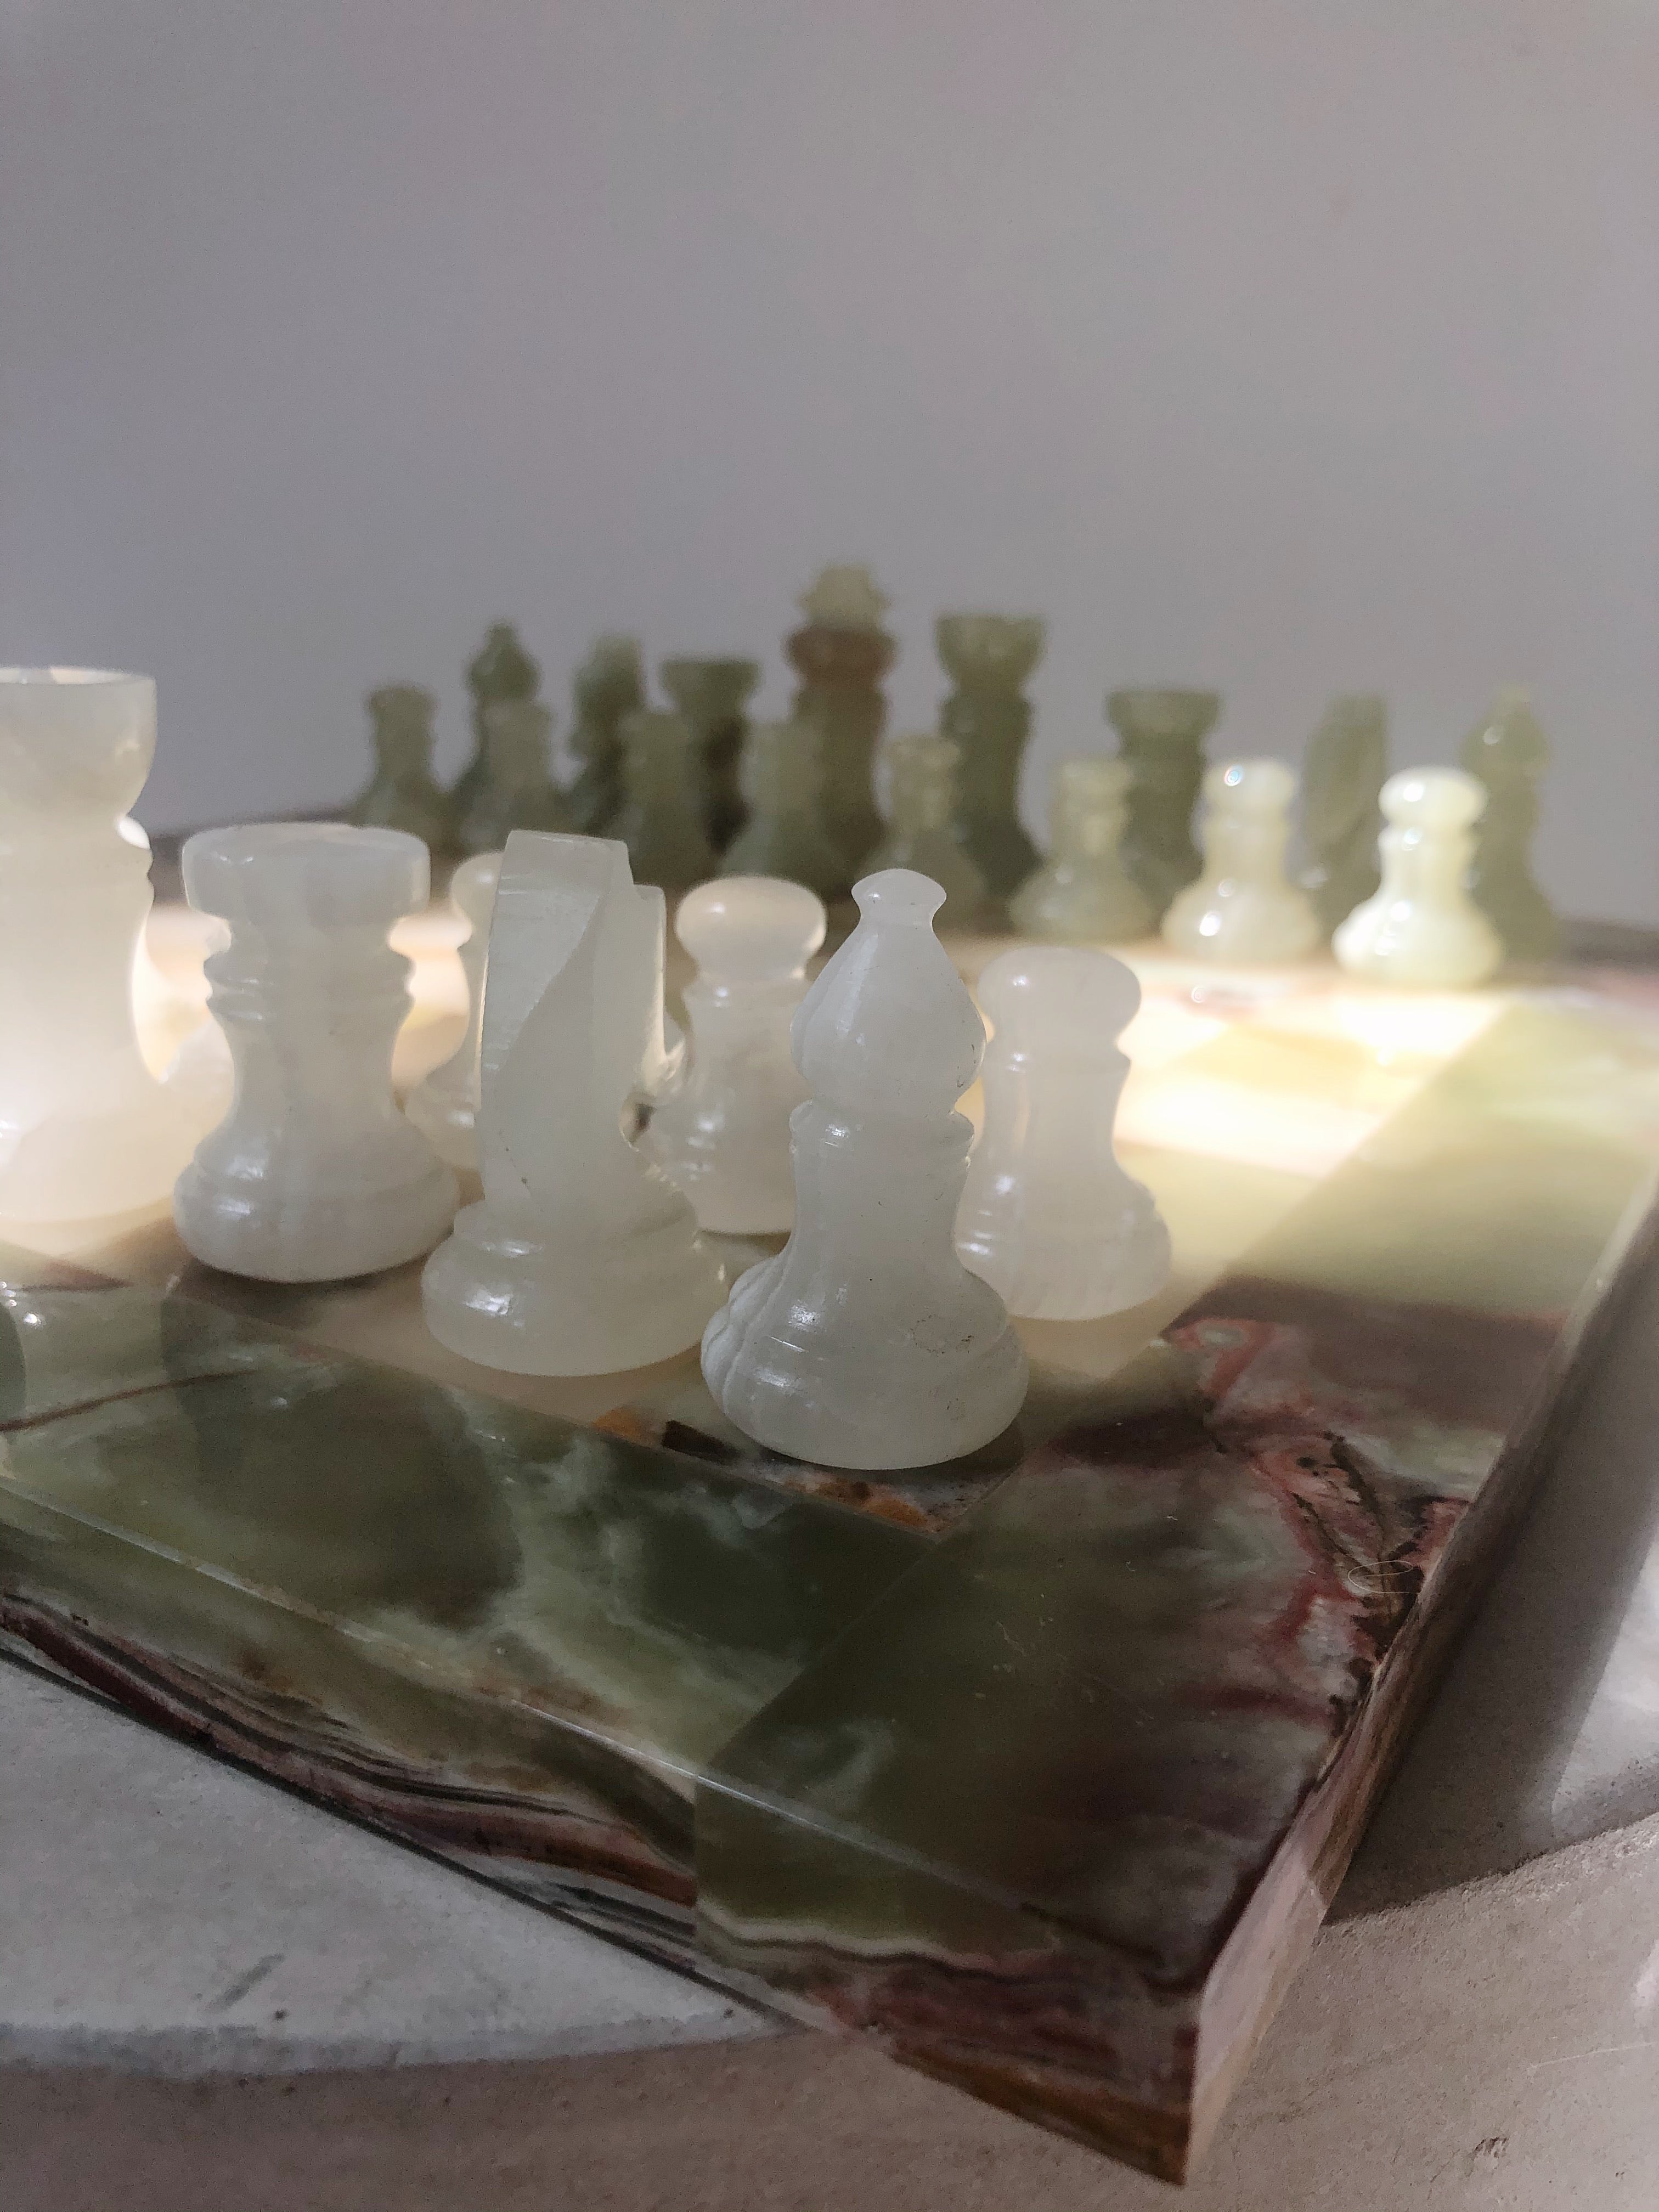 VINTAGE NATURAL STONE CHESSBOARD